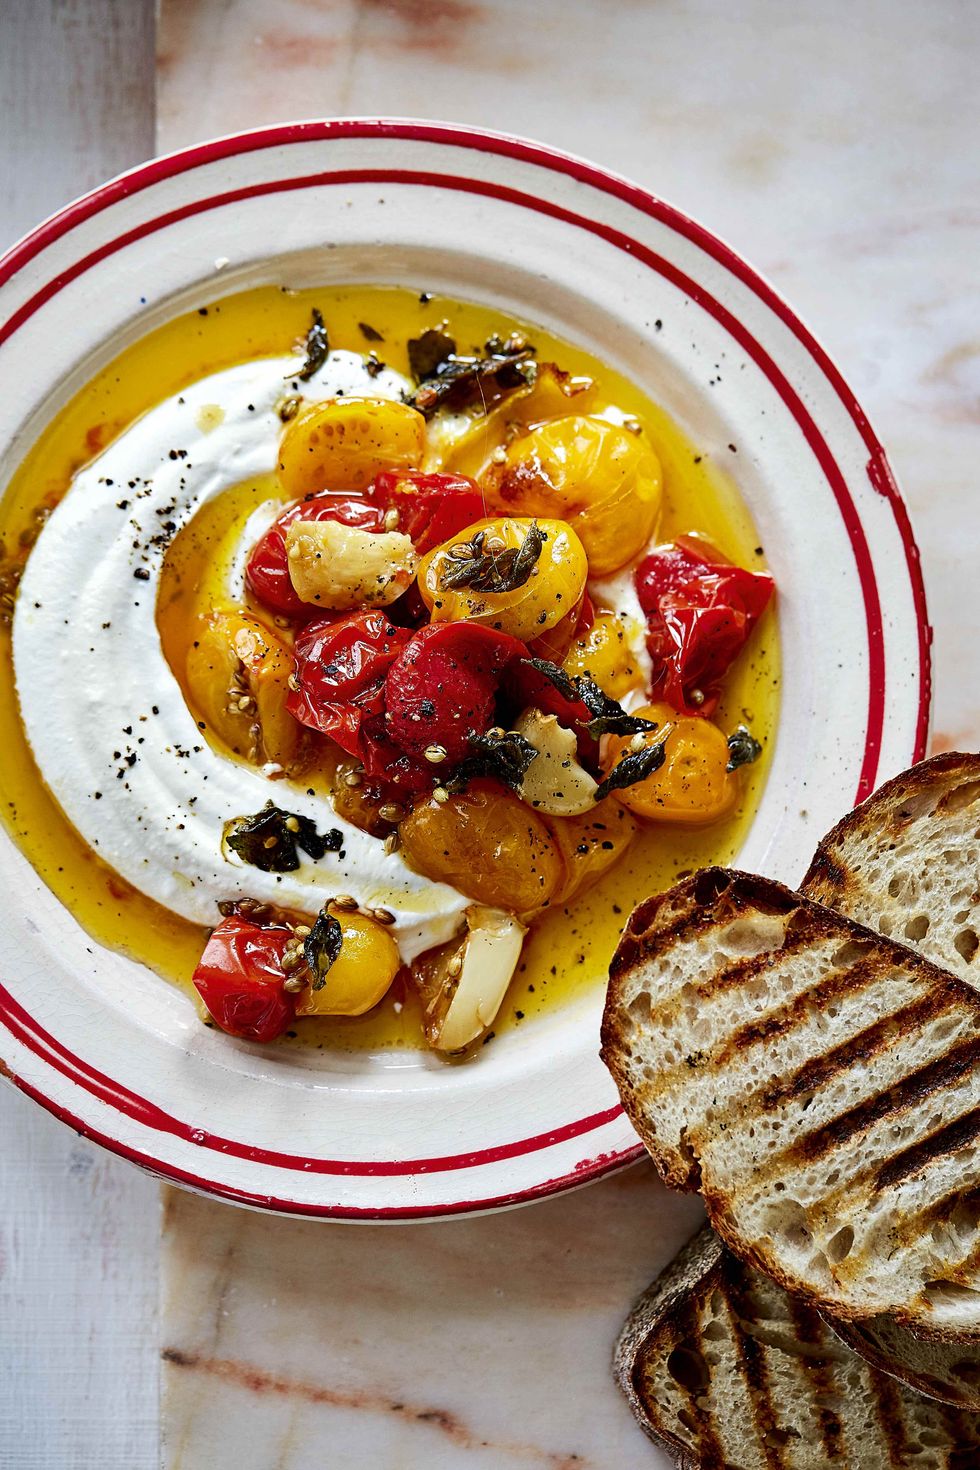 a whipped feta and confit tomatoes dish featured in bhogal's new book